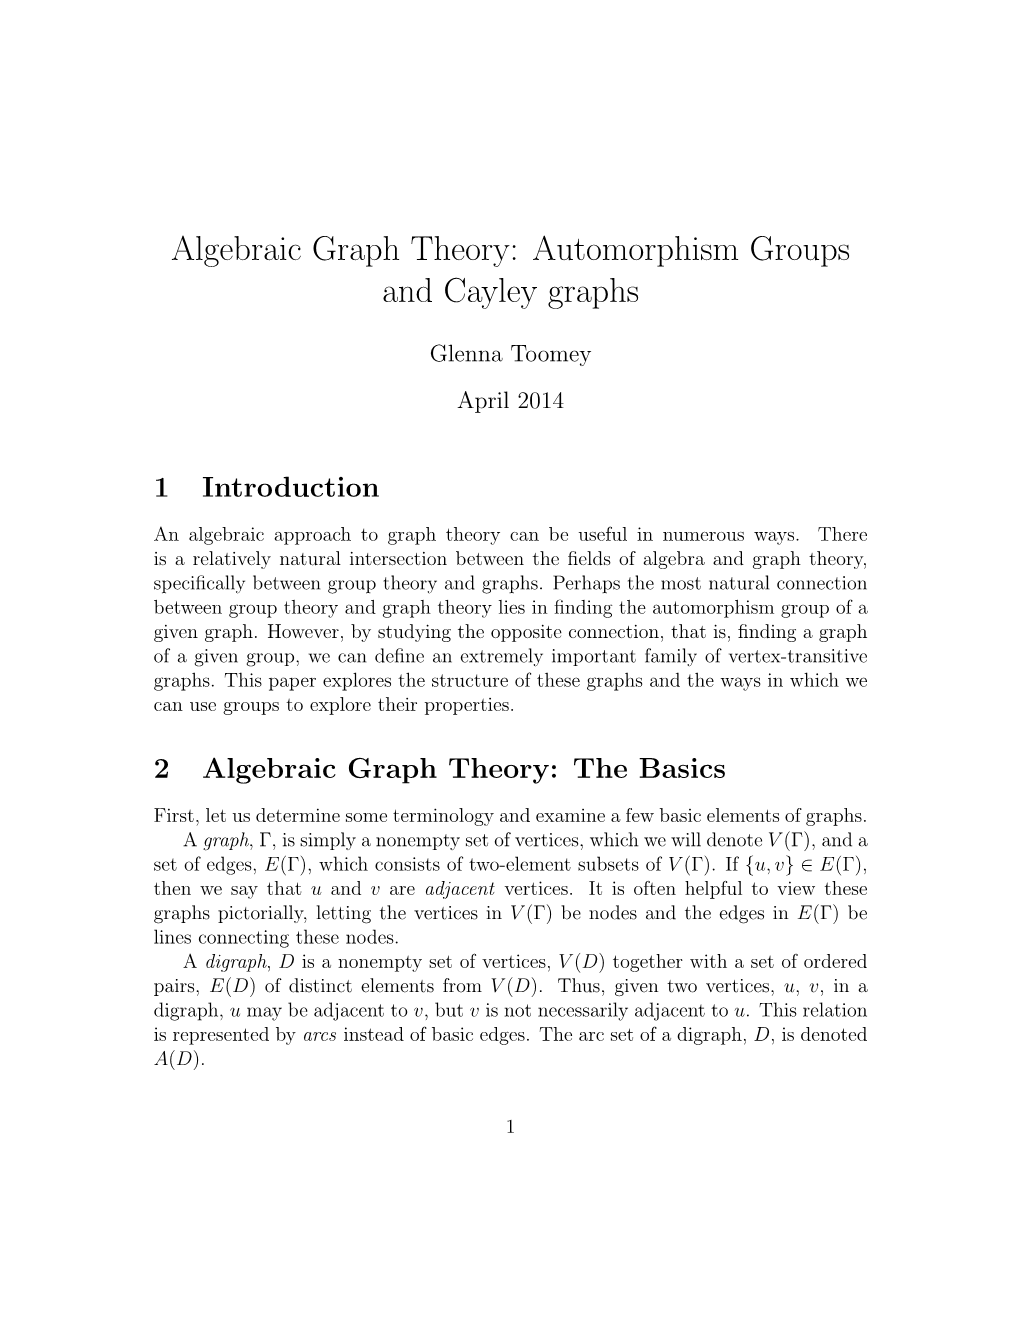 Algebraic Graph Theory: Automorphism Groups and Cayley Graphs